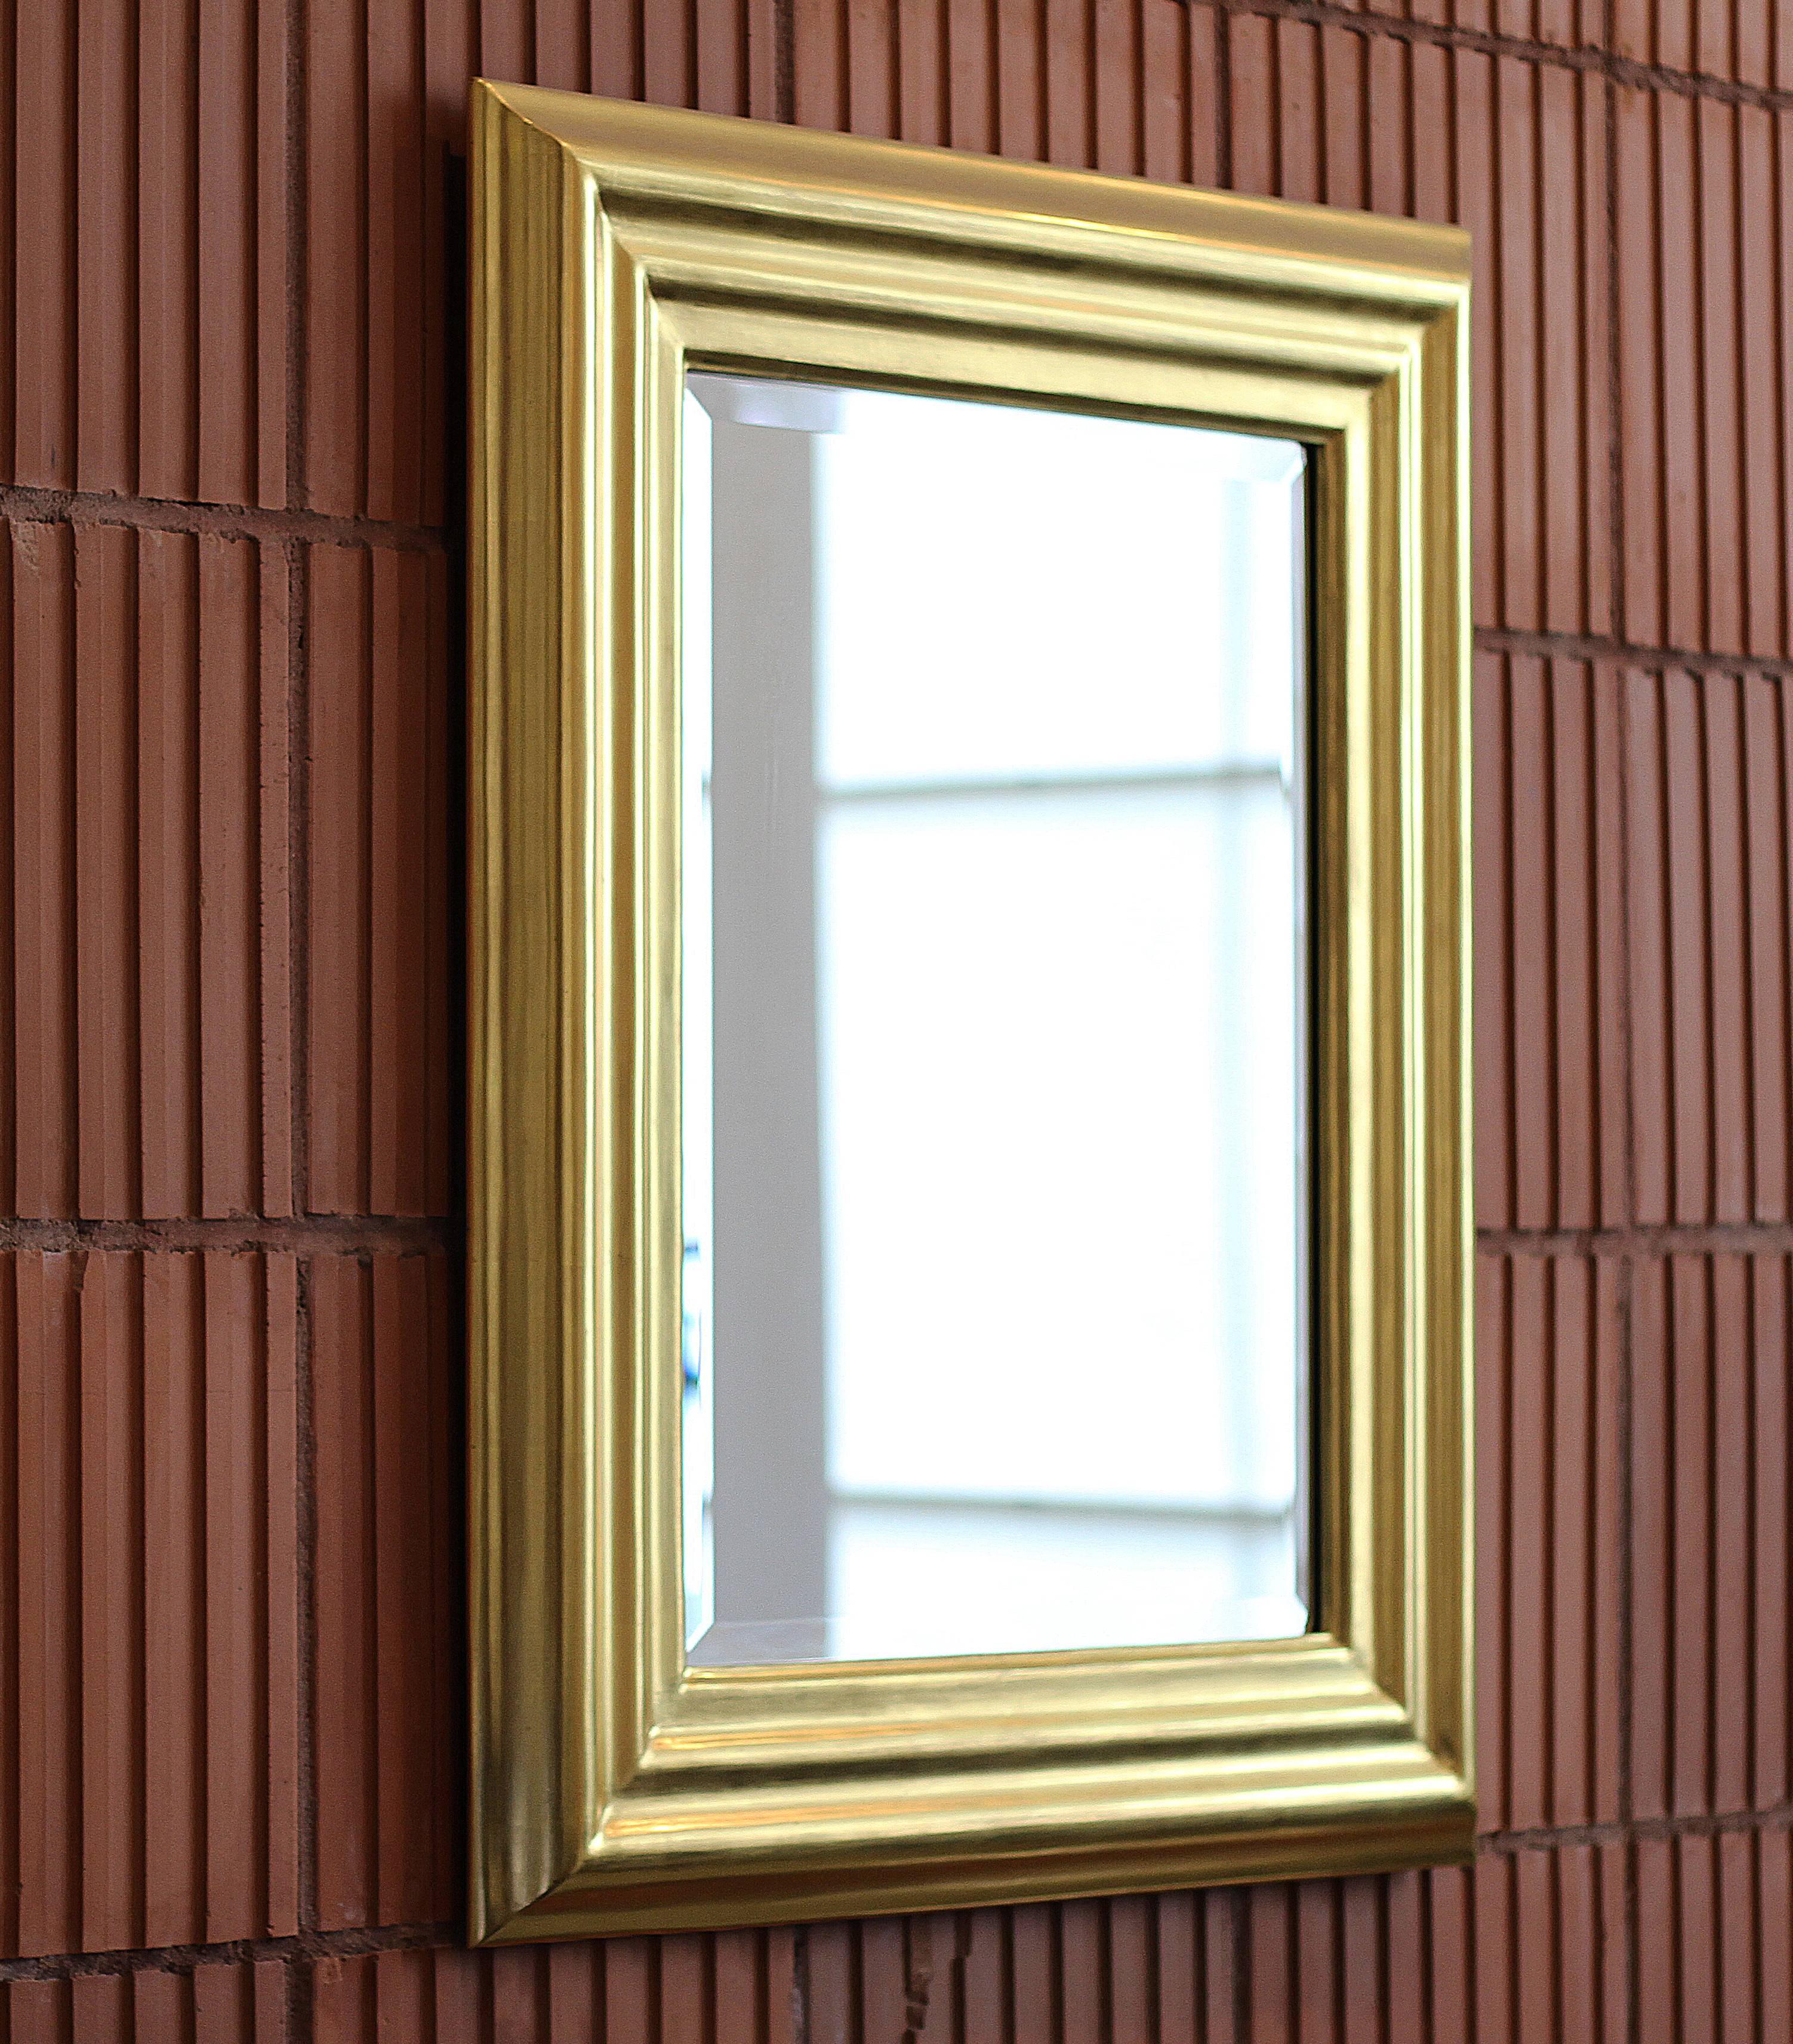 American Degas No. 6 Ripple Wall Mirror, Gilded in 23kt Yellow Gold, by Bark Frameworks For Sale